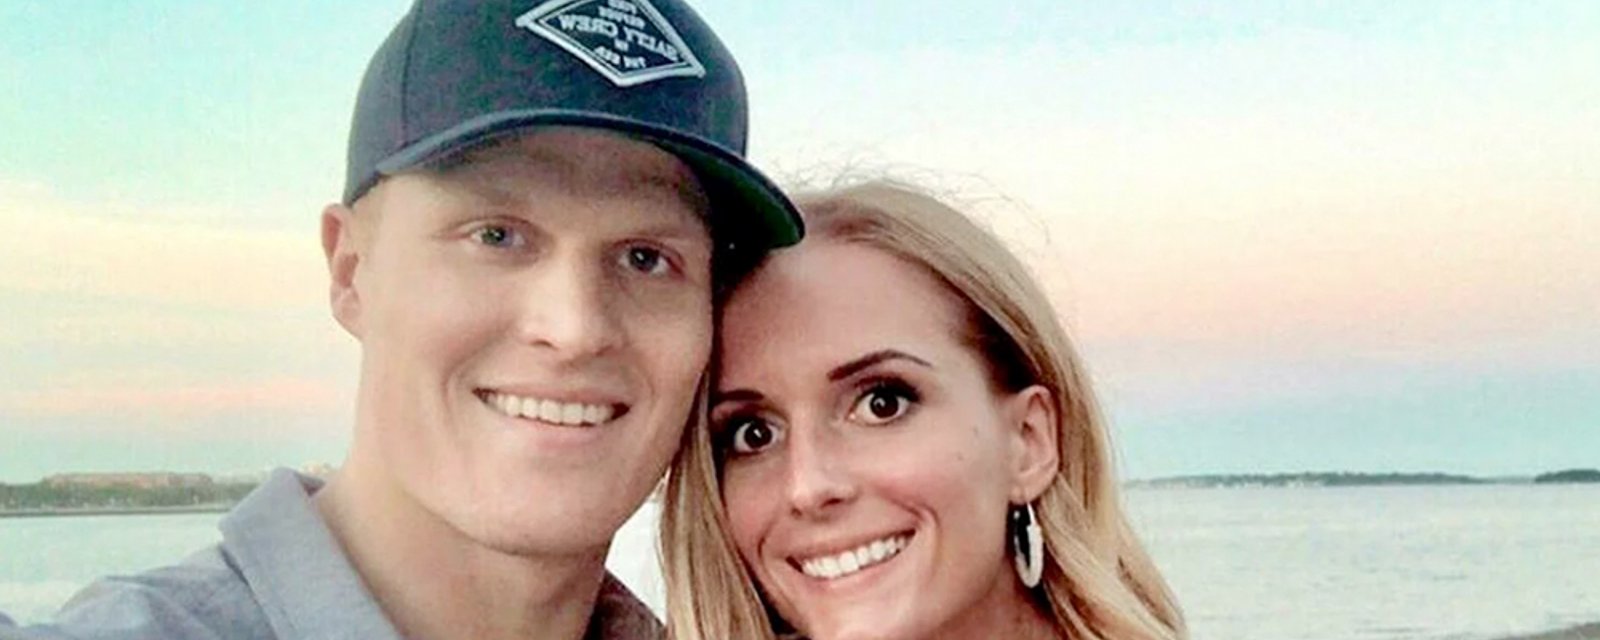 Emily Cave shares the crushing details of her husband’s death